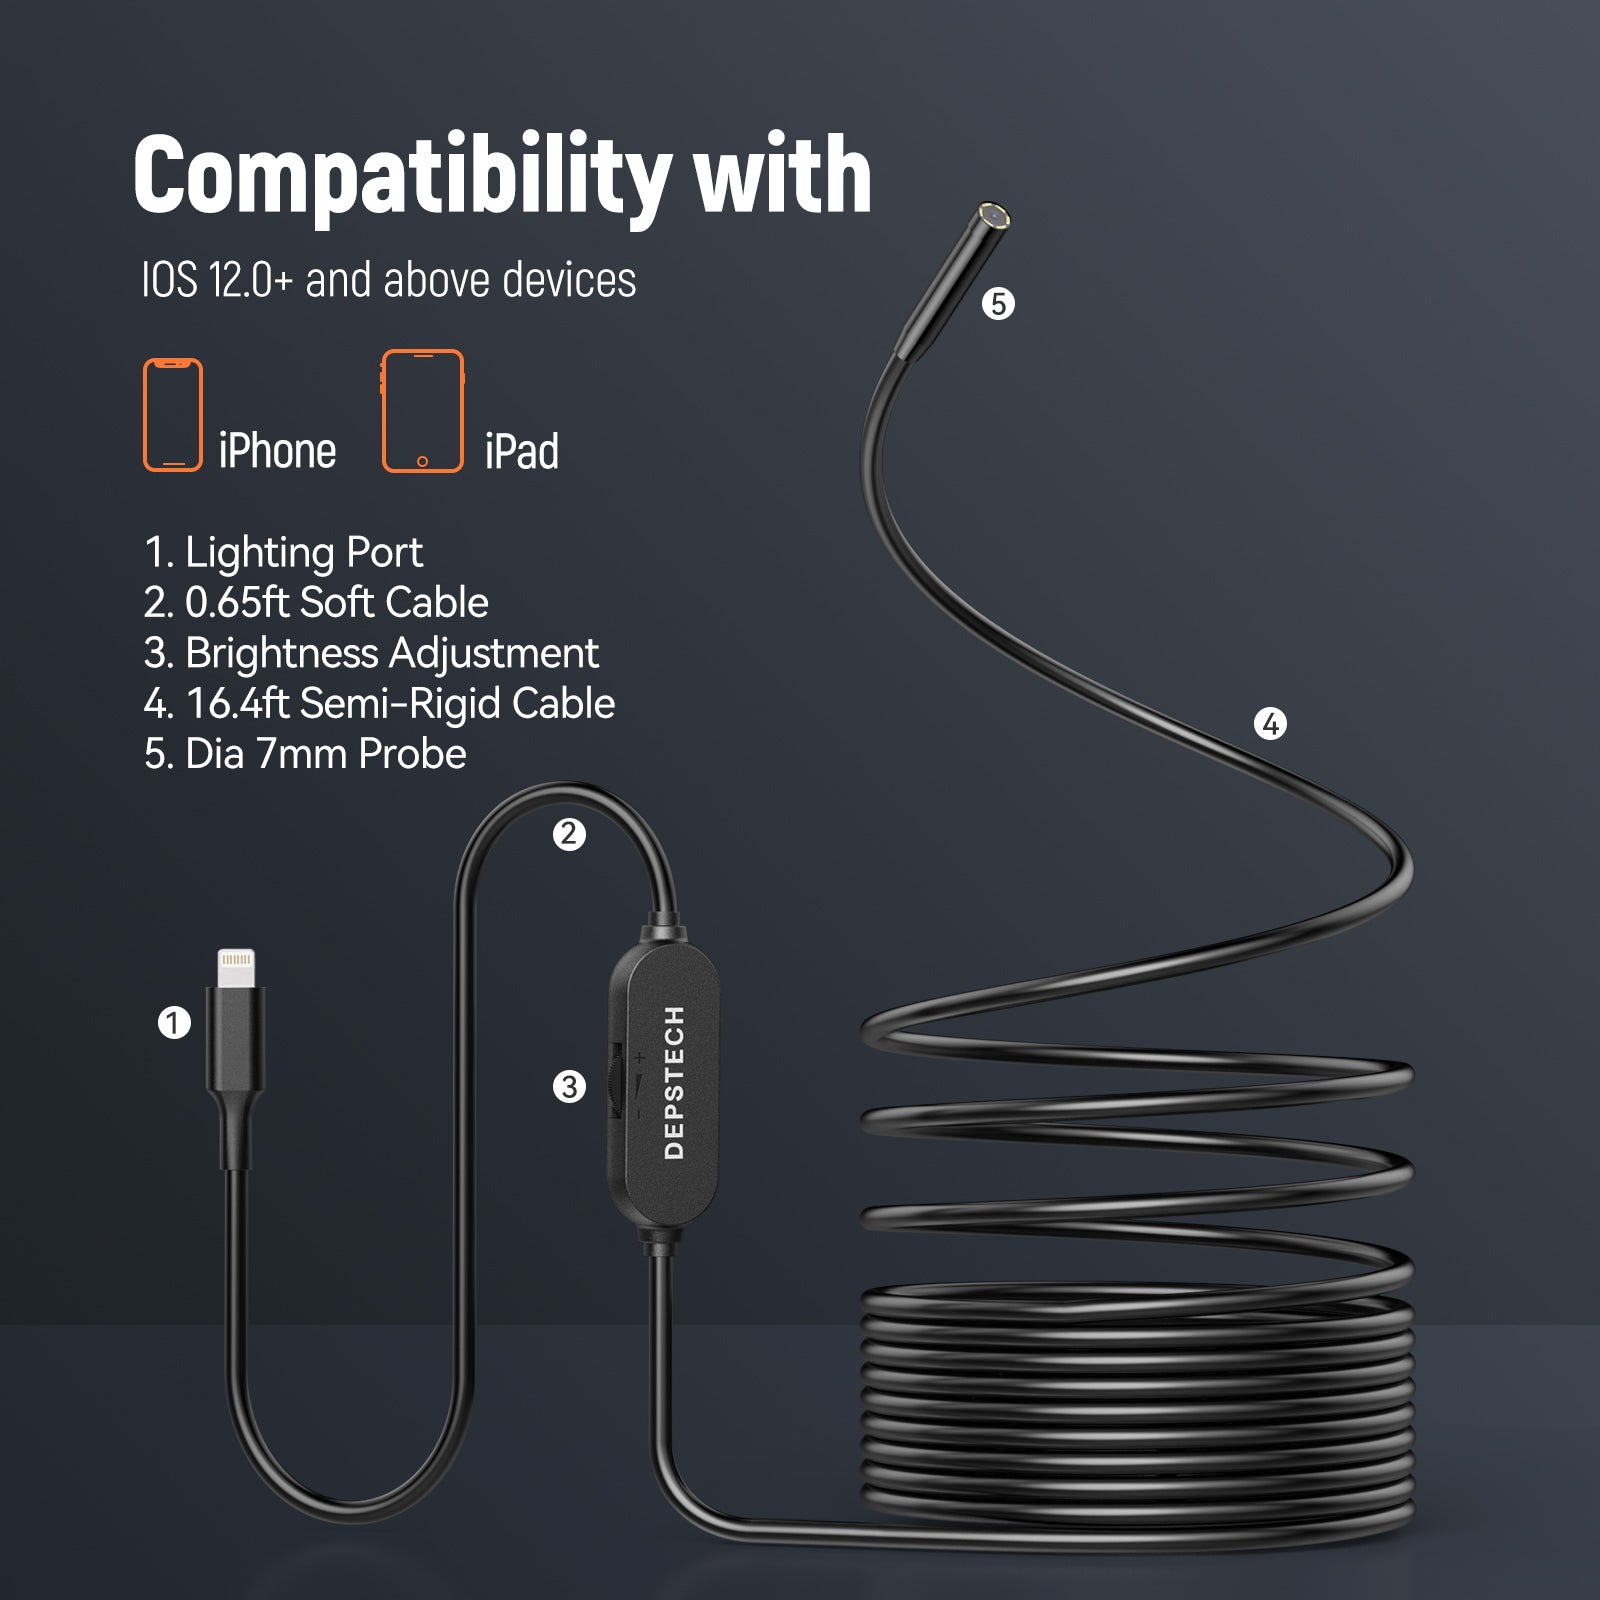 Endoscope Camera with Light, Waterproof Snake Camera for iPhone and iPad